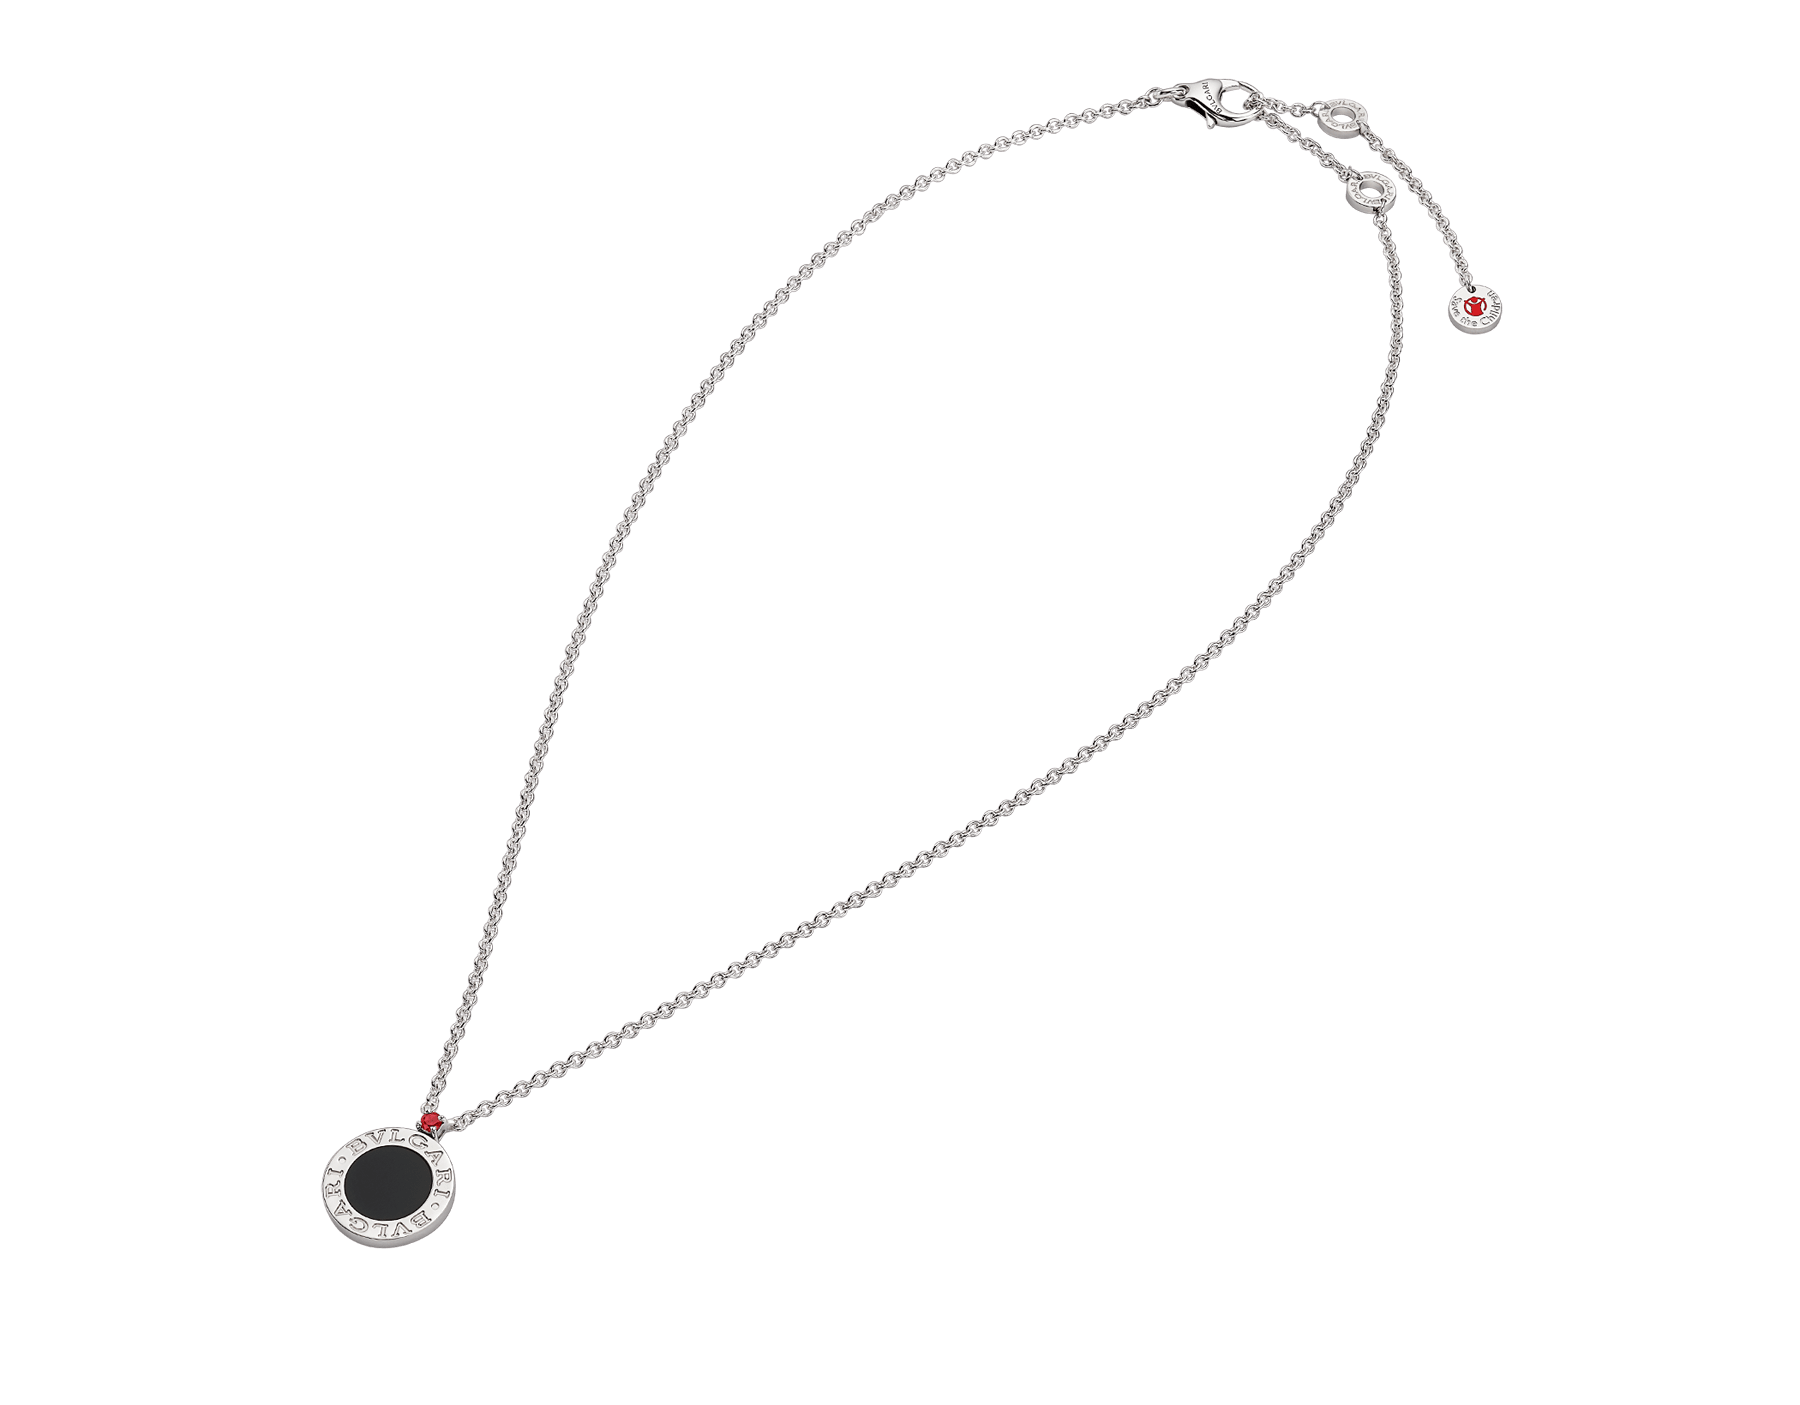 bvlgari save the child necklace gold